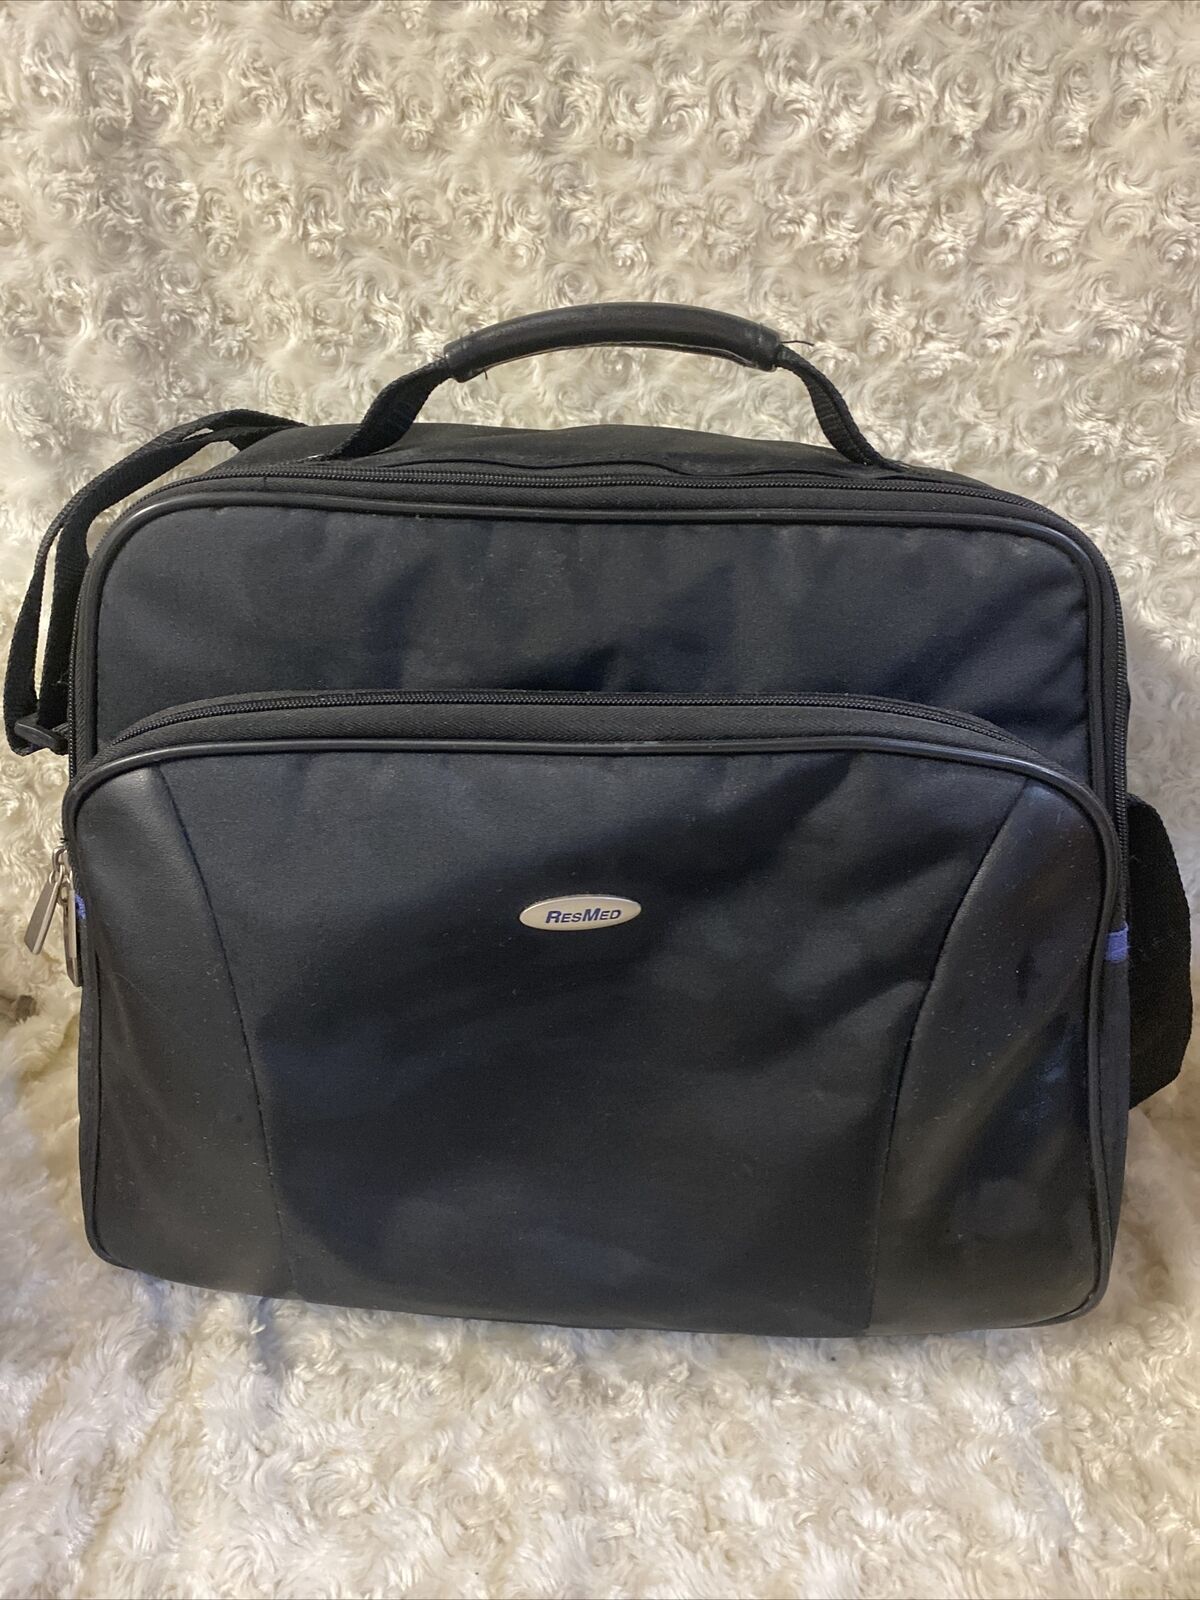 Resmed Padded Travel Bag Used For S8 Series Ii H4i And Contents In Pictures